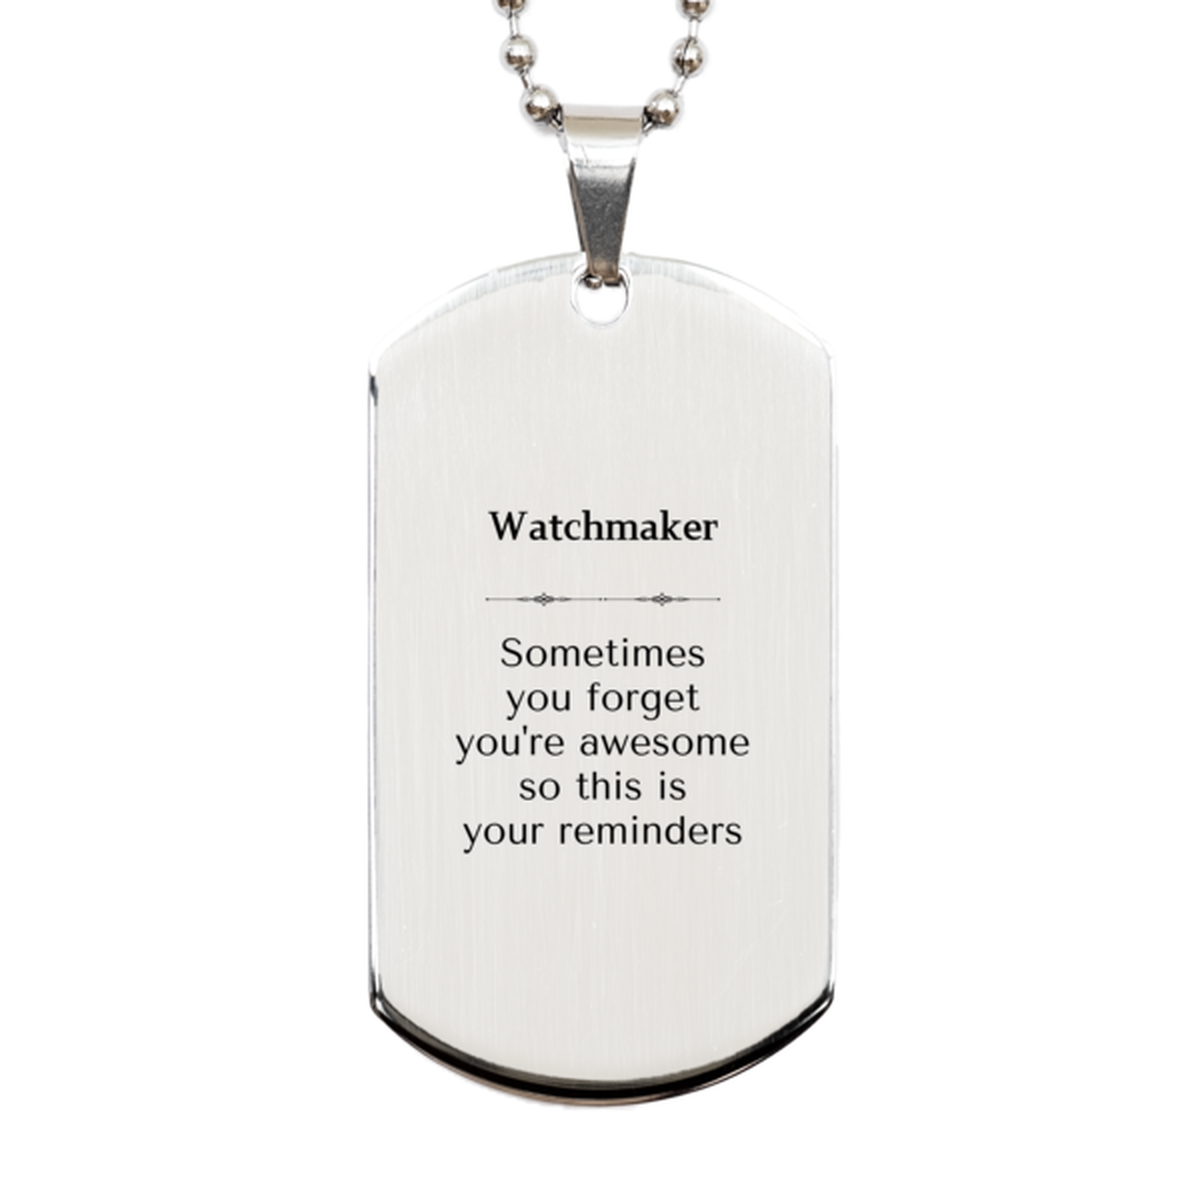 Sentimental Watchmaker Silver Dog Tag, Watchmaker Sometimes you forget you're awesome so this is your reminders, Graduation Christmas Birthday Gifts for Watchmaker, Men, Women, Coworkers